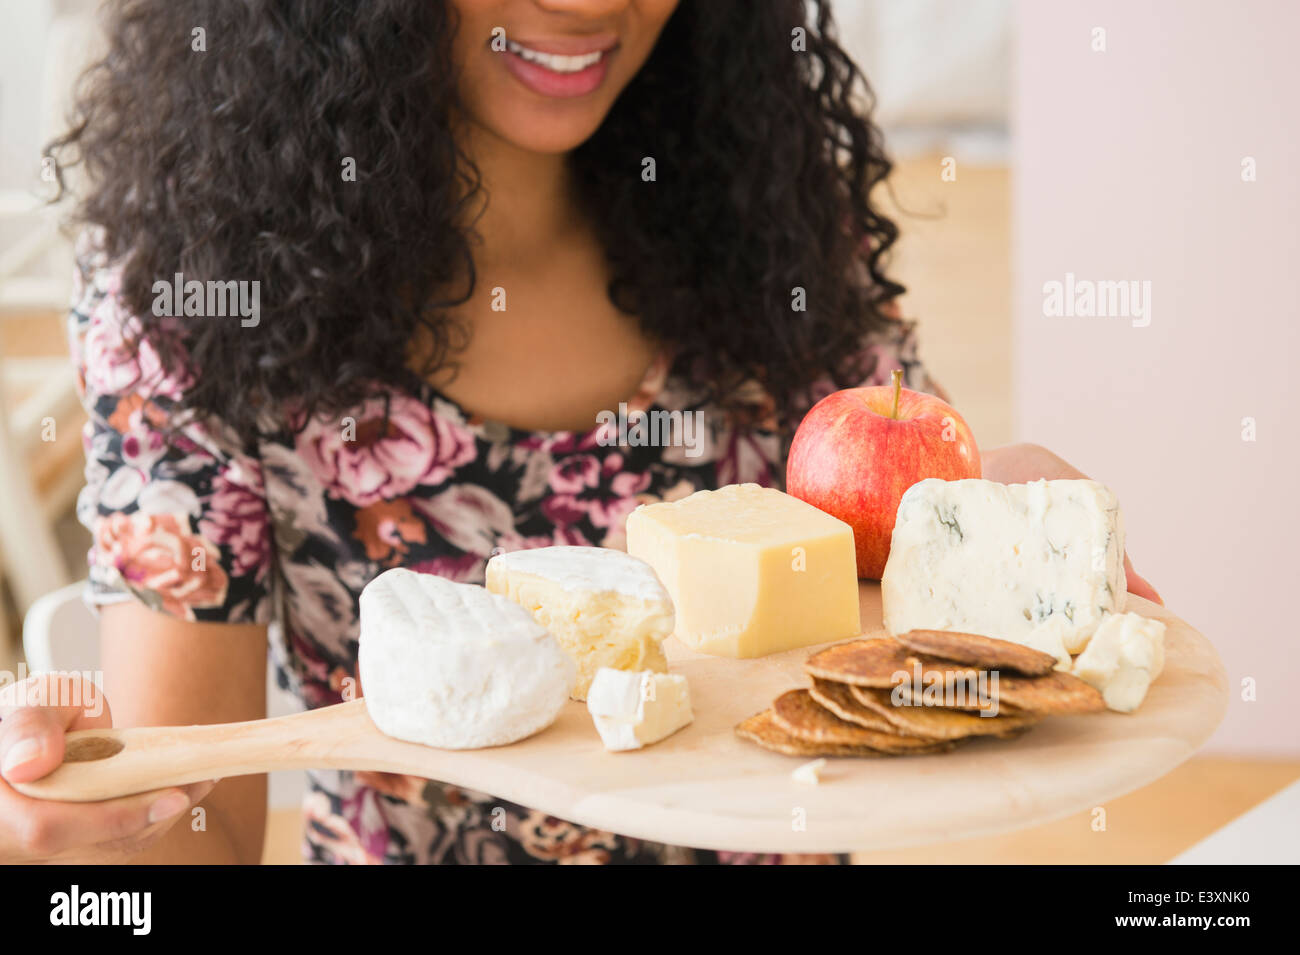 Mixed race woman carrying fruit and cheese board Stock Photo